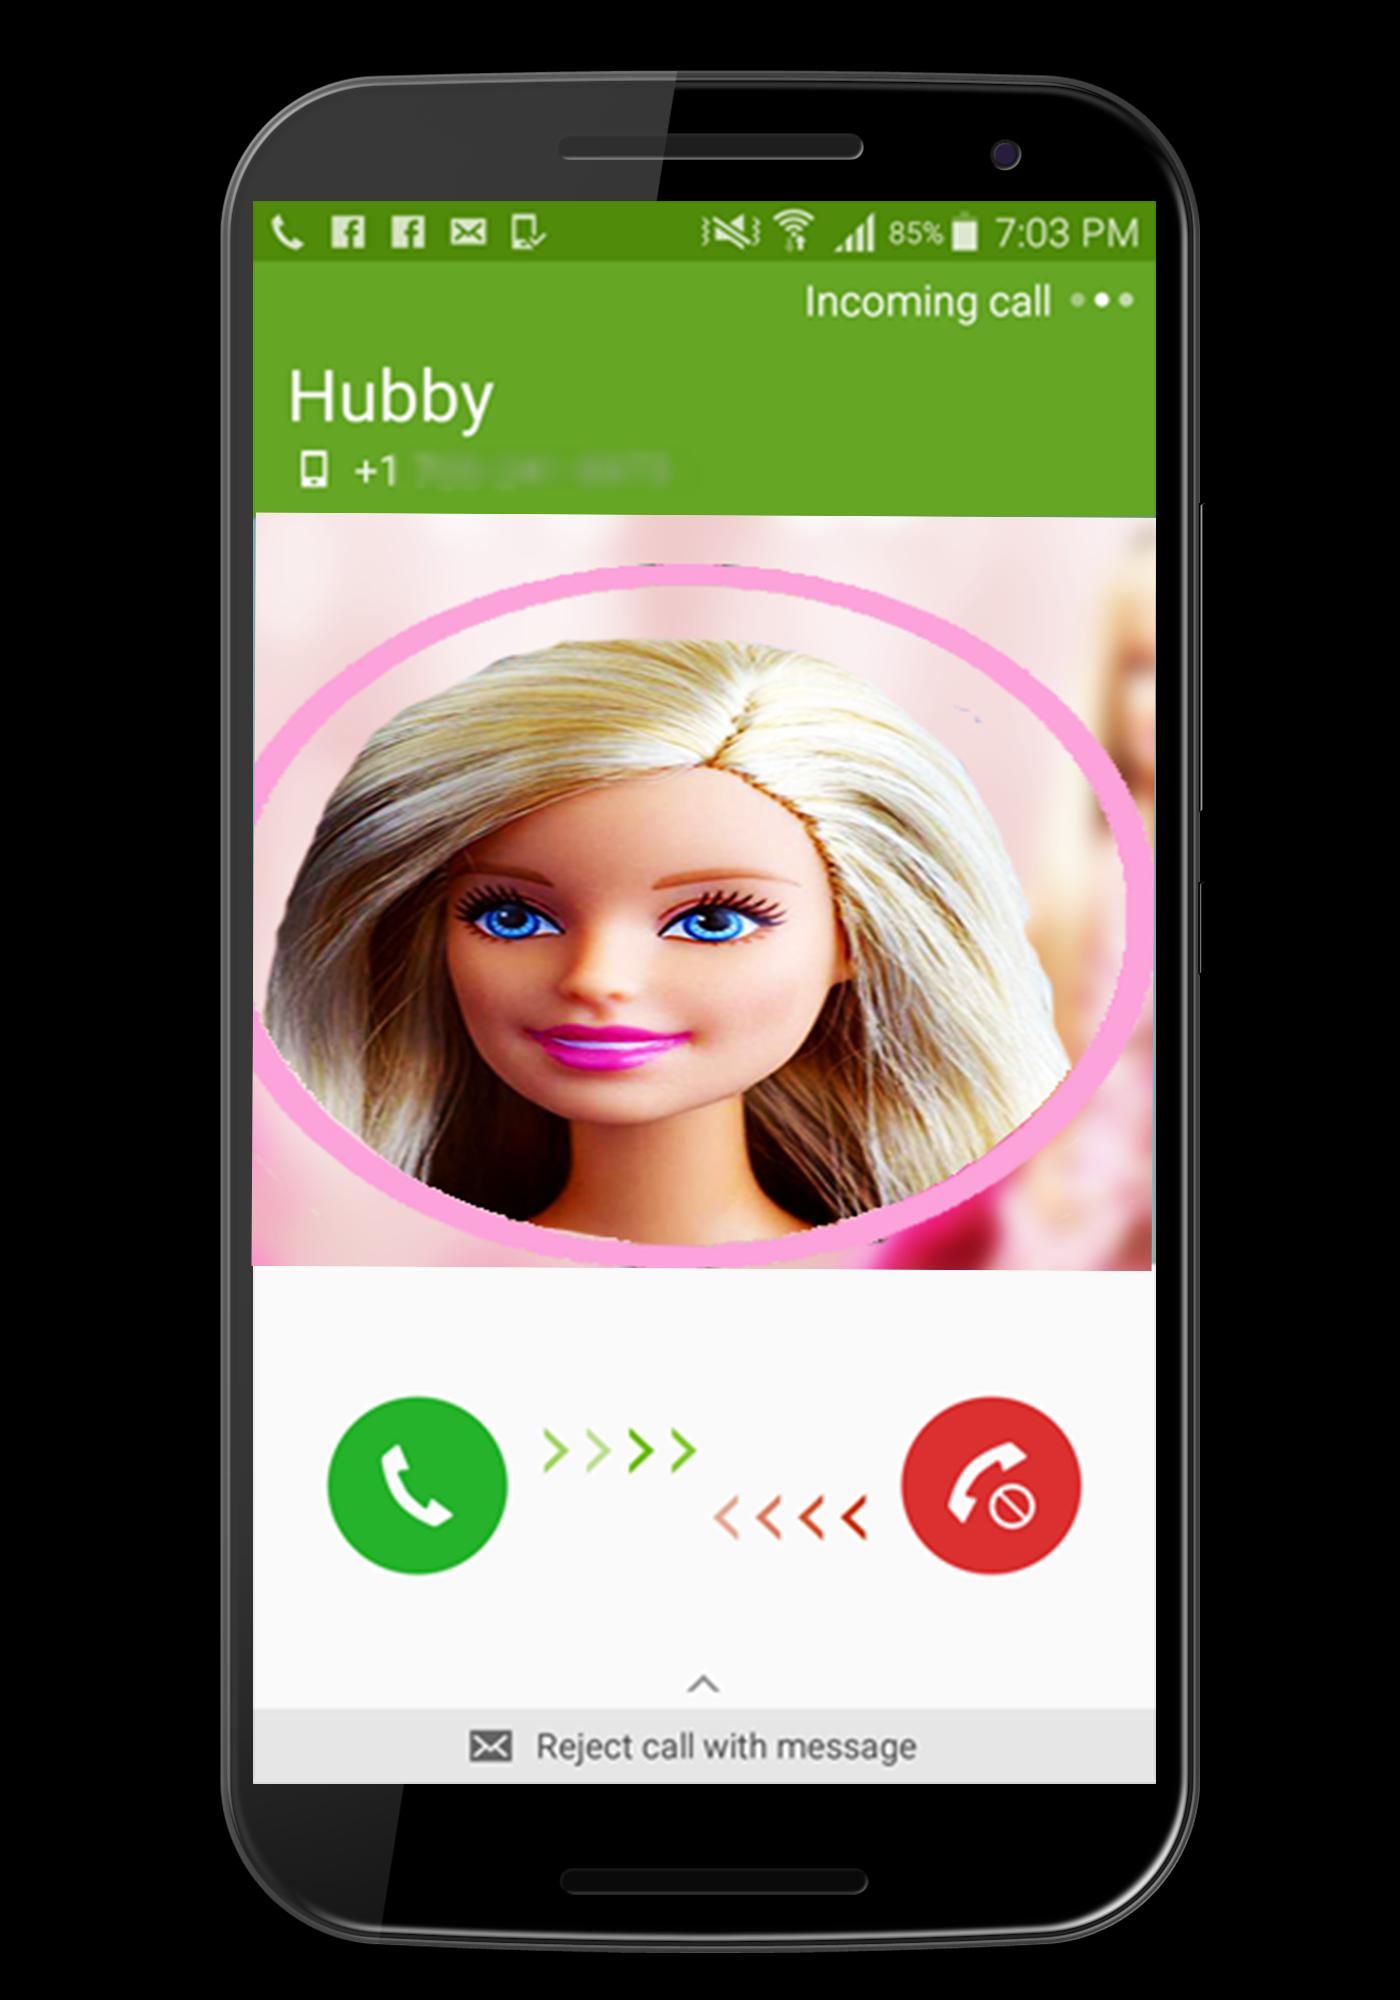 Barbie is Calling you : simulation 2018 for Android - APK Download